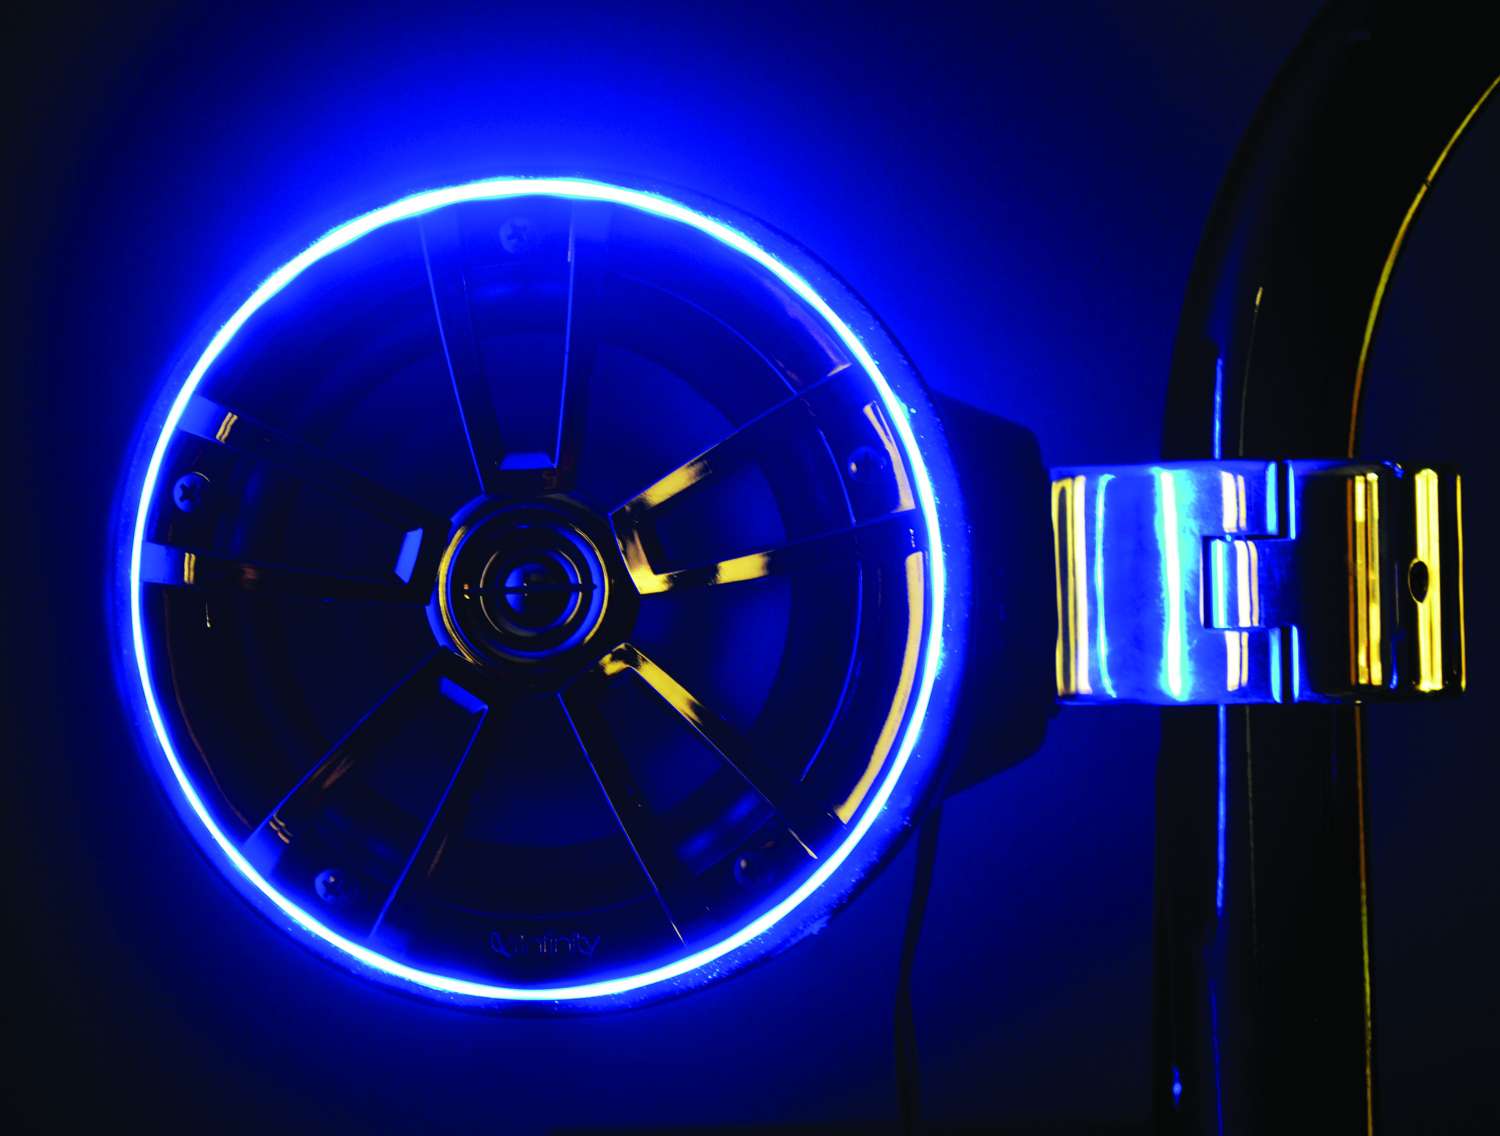 <b>TH-Marine</b><br>	Speaker LED Accent Ring<br>	Light up your boat speakers, and accent any 6-inch round speaker with attractive LEDs. The ring contains 30 attractive blue LEDs, it fits behind 6-inch round speaker enclosures and it offers easy installation.